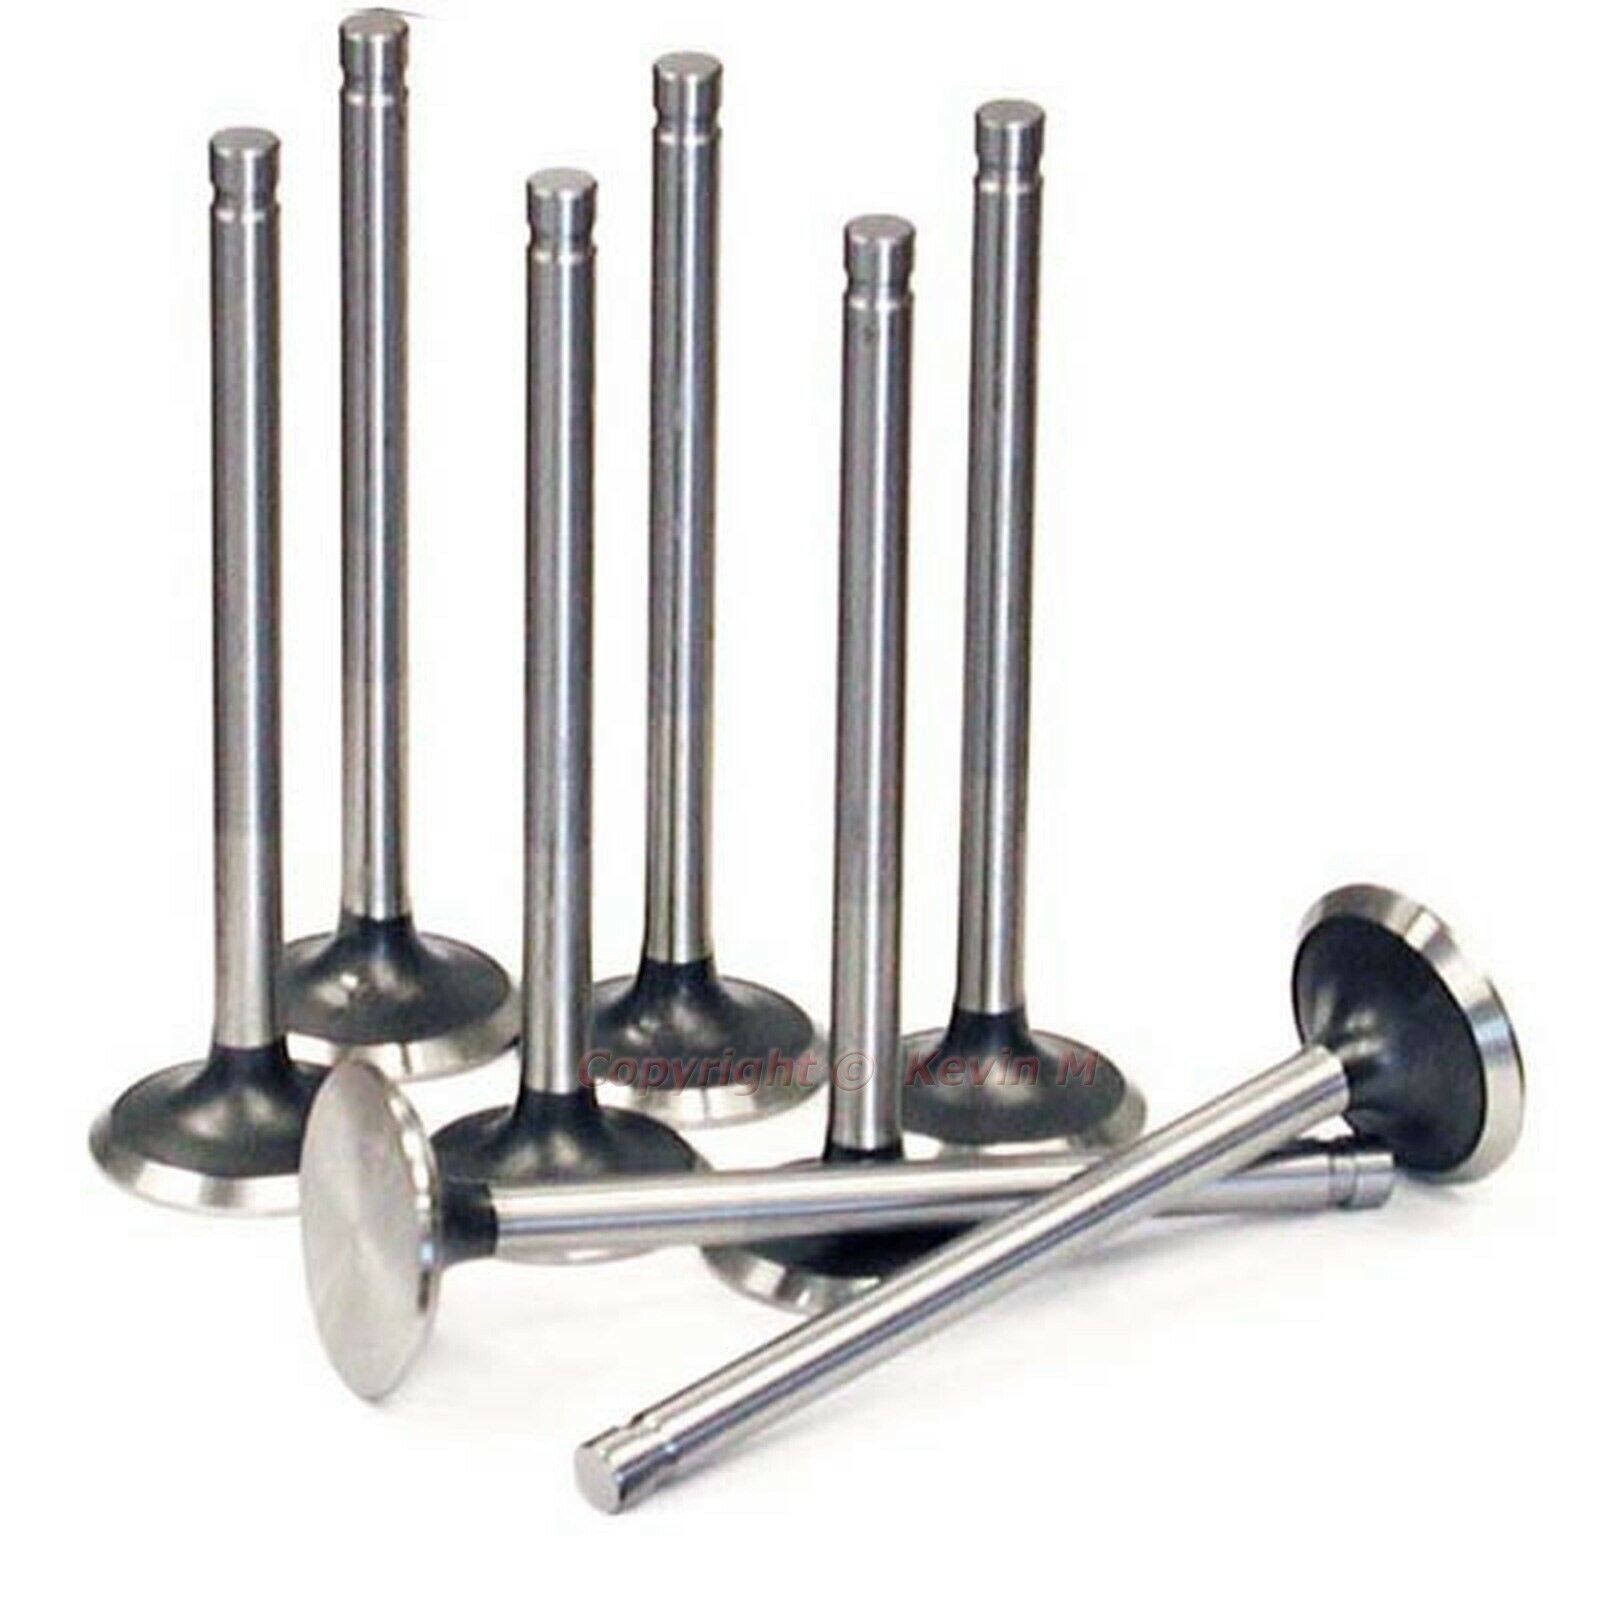 New Set of 8 Exhaust Valves Fits Some Ford 239 256 272 292 312 Y-Block Engines